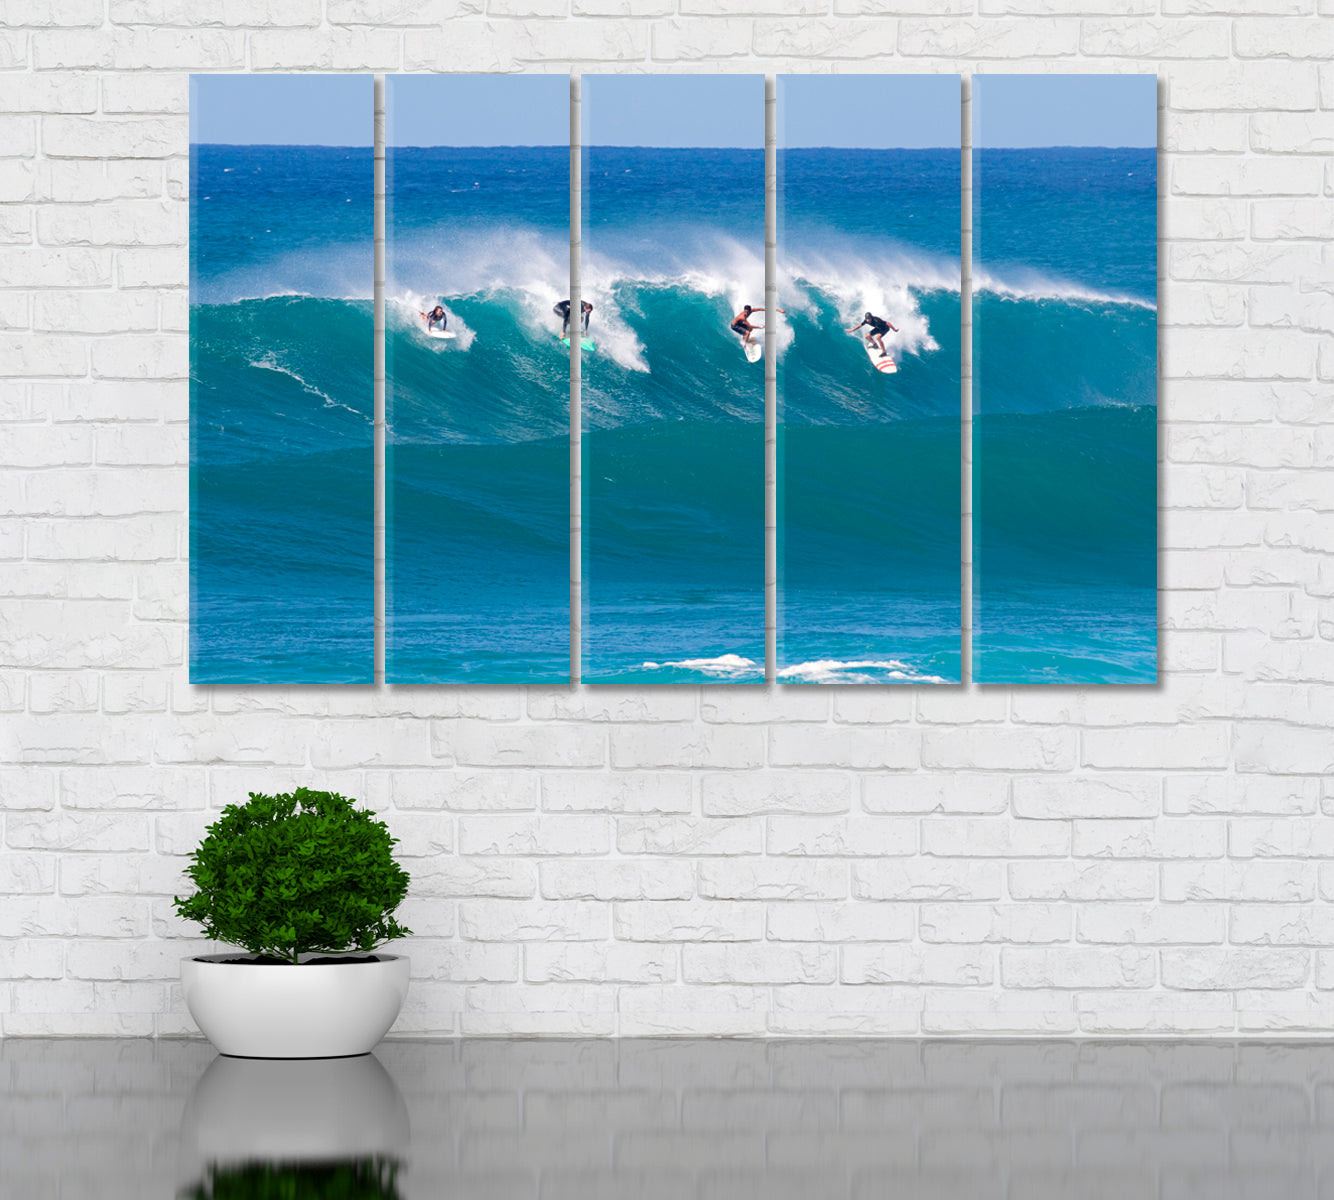 Surfers Riding Wave Hawaii Canvas Print ArtLexy 5 Panels 36"x24" inches 